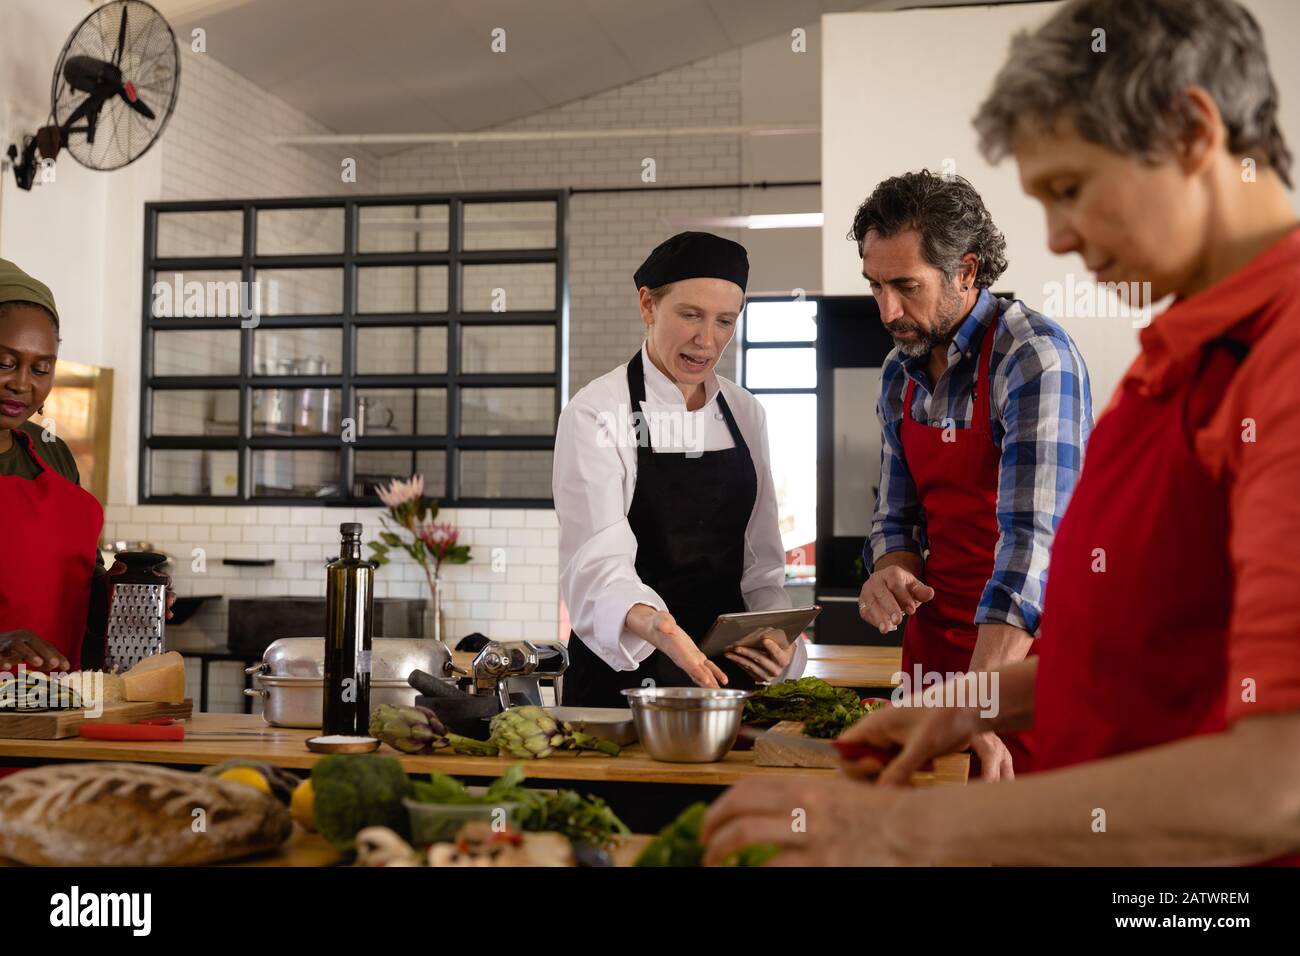 Chefs cooking together Stock Photo